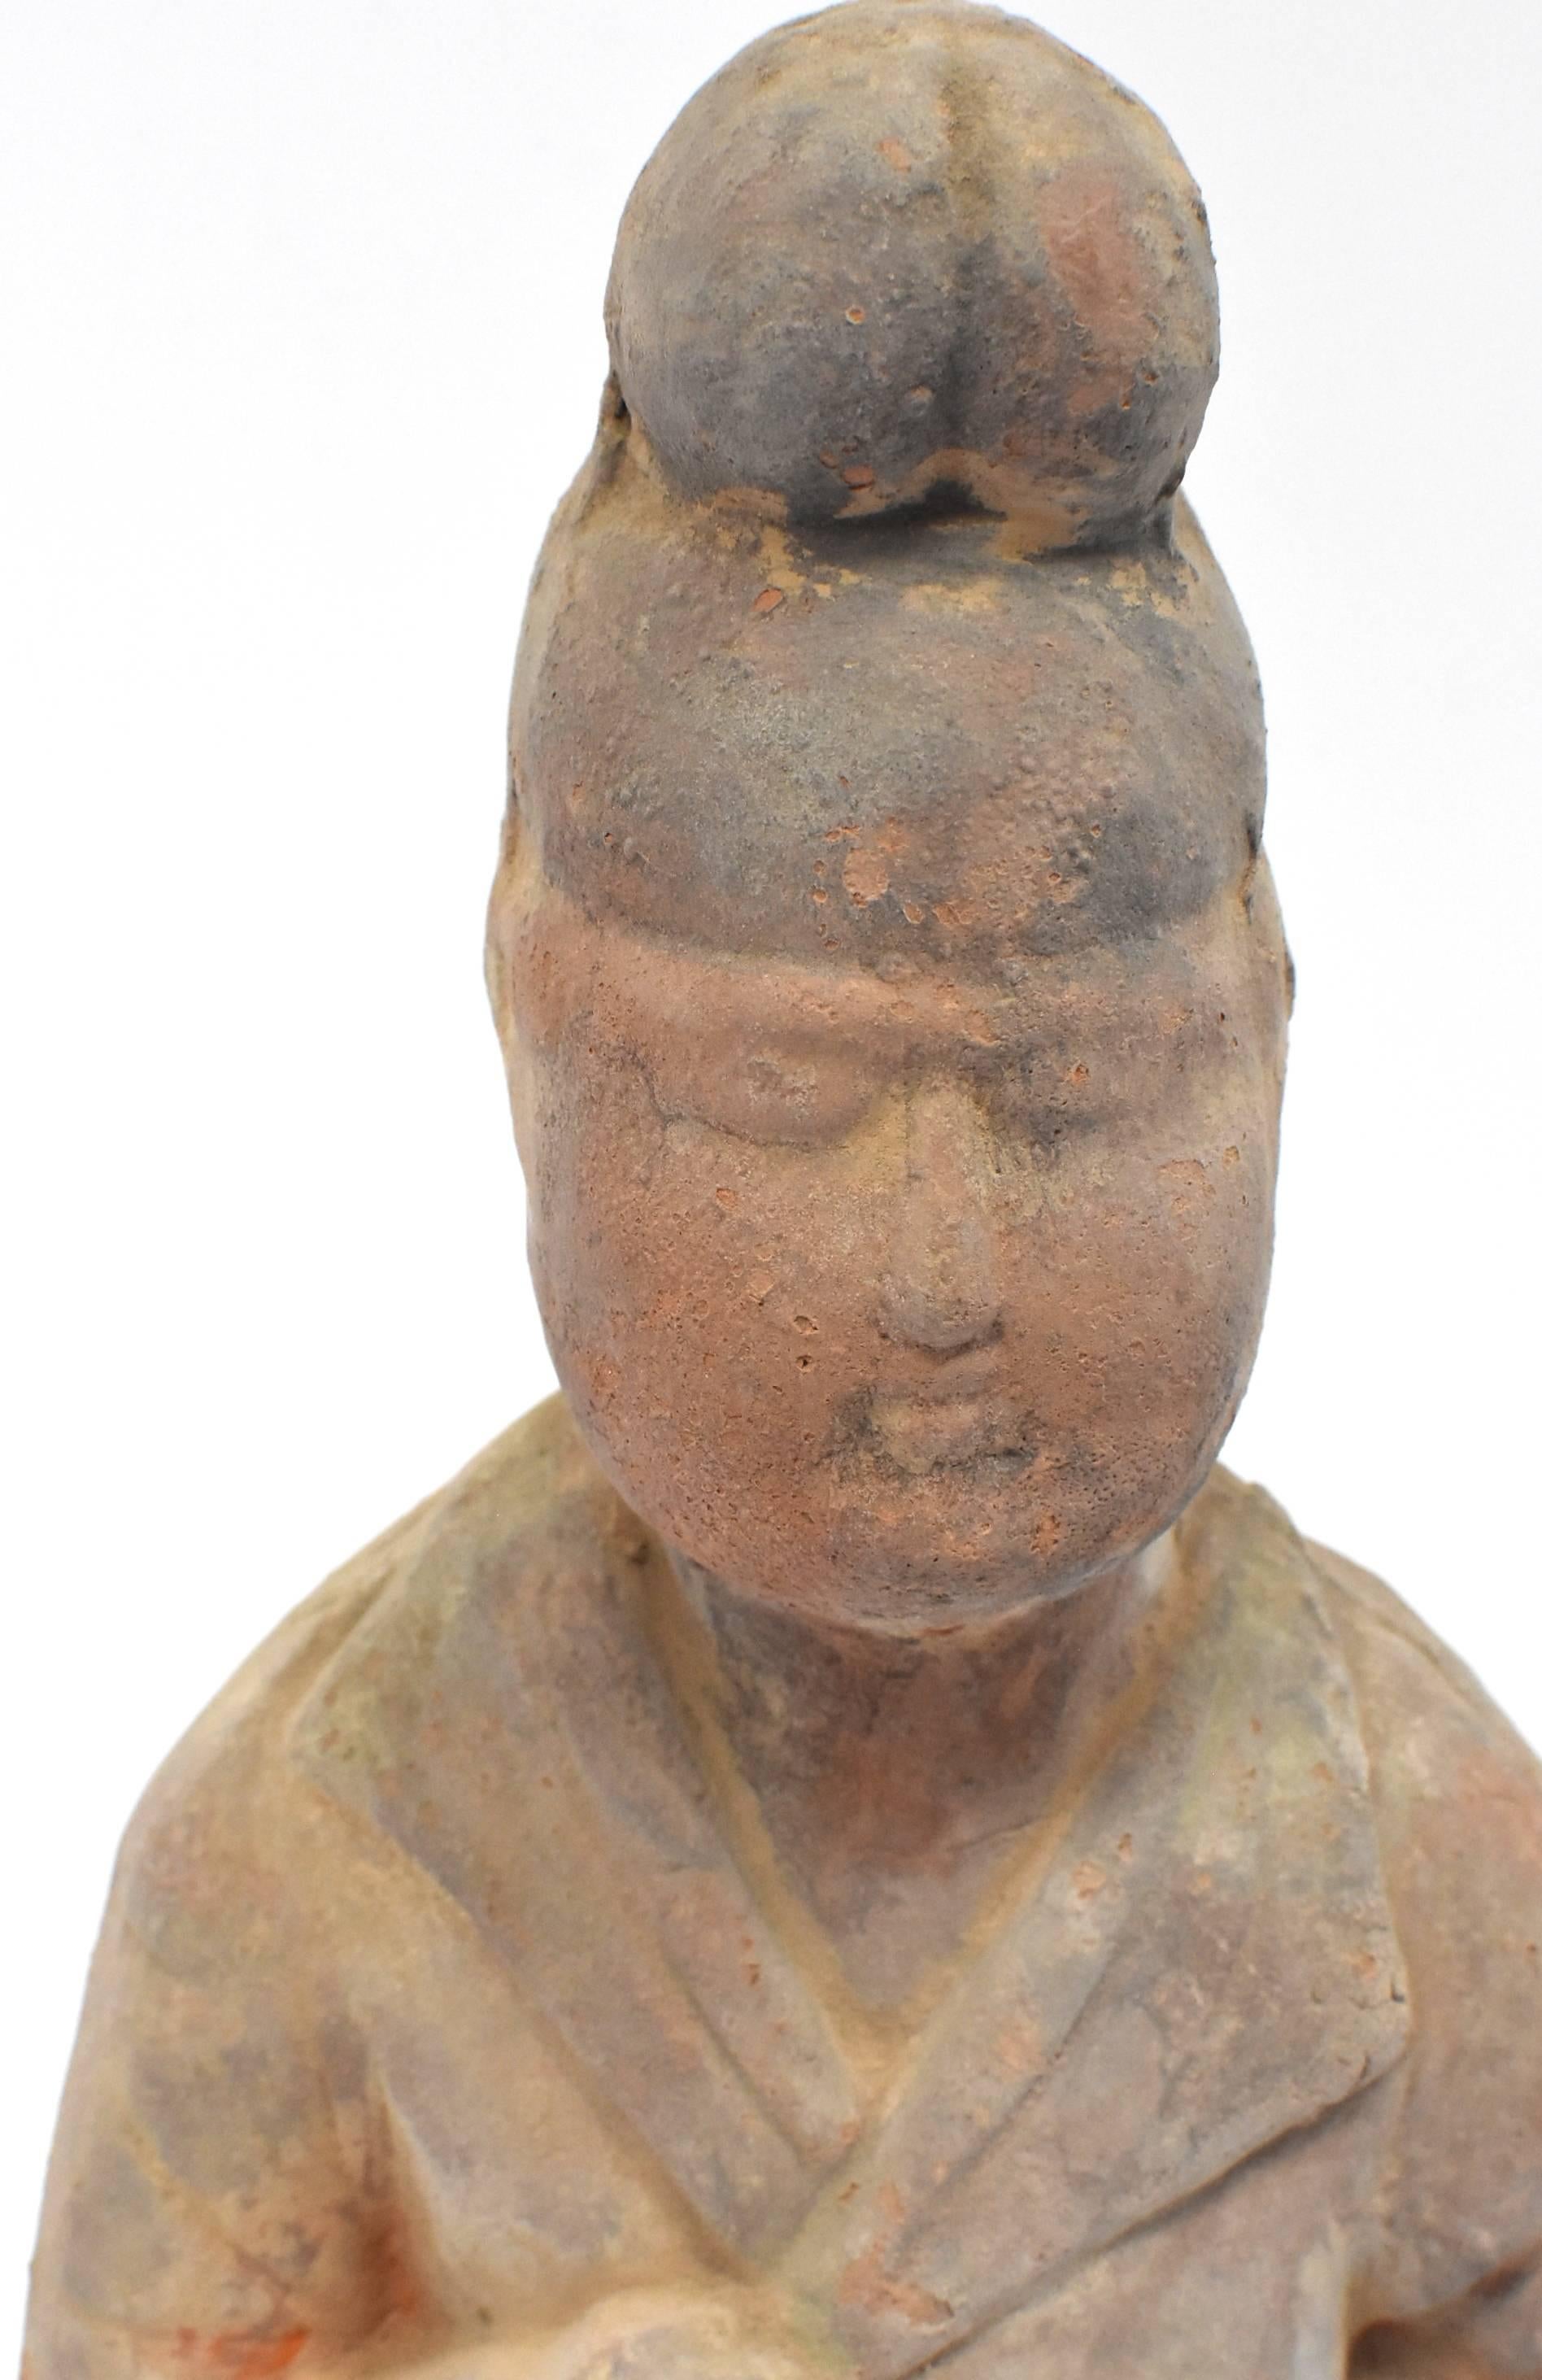 A fantastic Han style terracotta figure. Such a figure is seen in the Han dynasty dating 206 BC-220 AD. This piece is one of the oldest pieces among our collections. He appears to be a chef or a merchant who distributes buns, dumplings and other